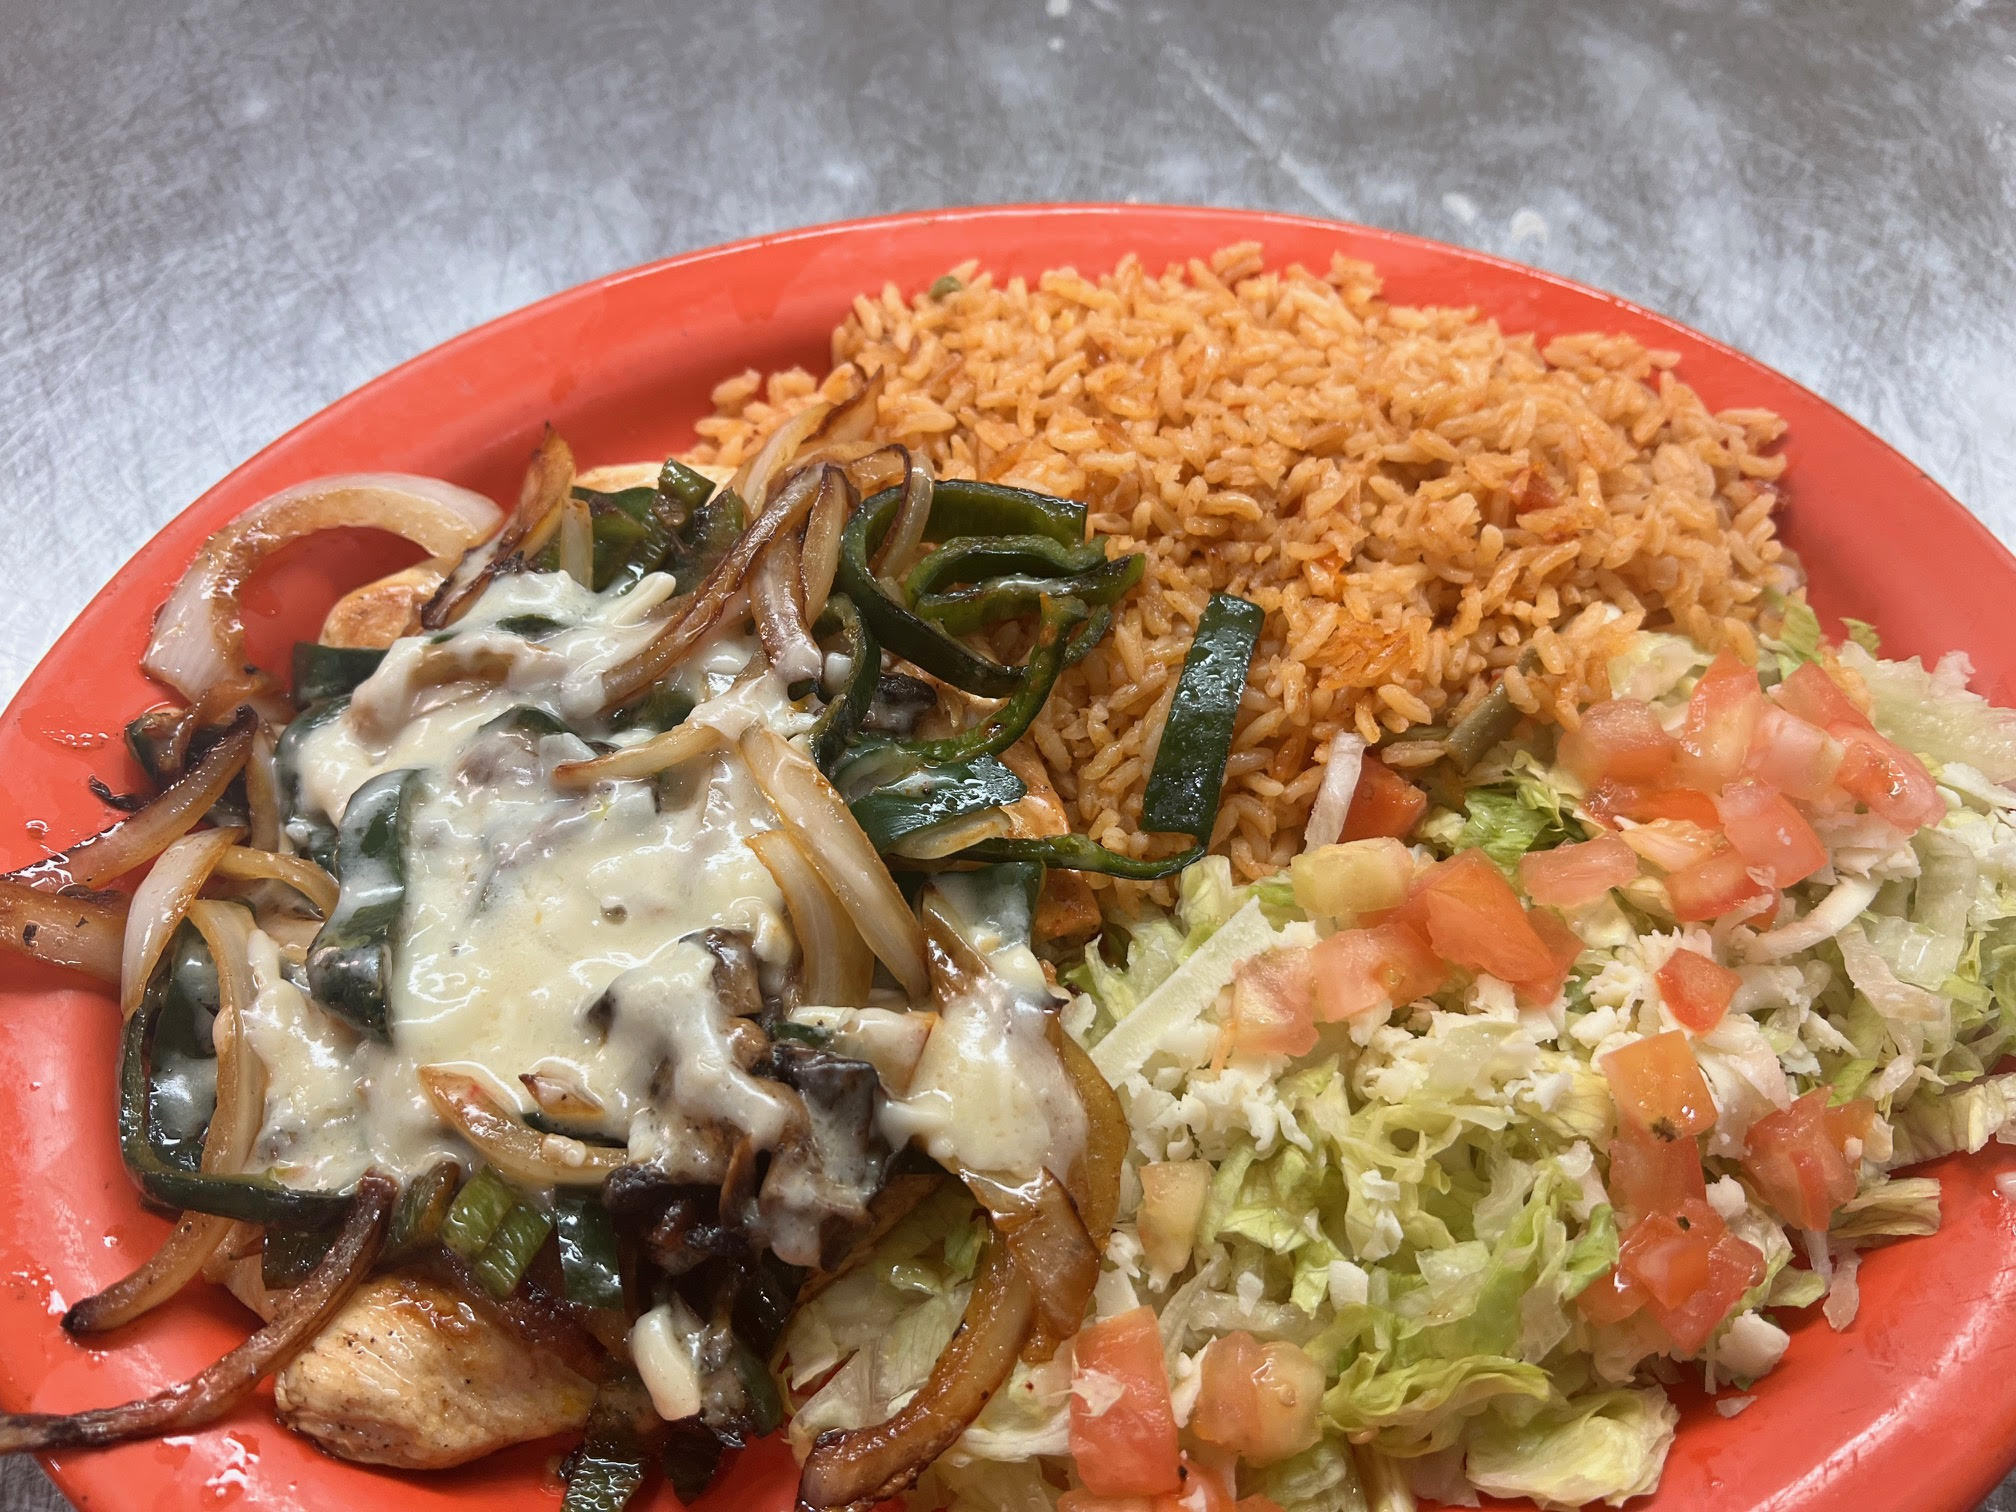 El Taxco Salads are low carb, low protien healthy option for lunch or dinner.